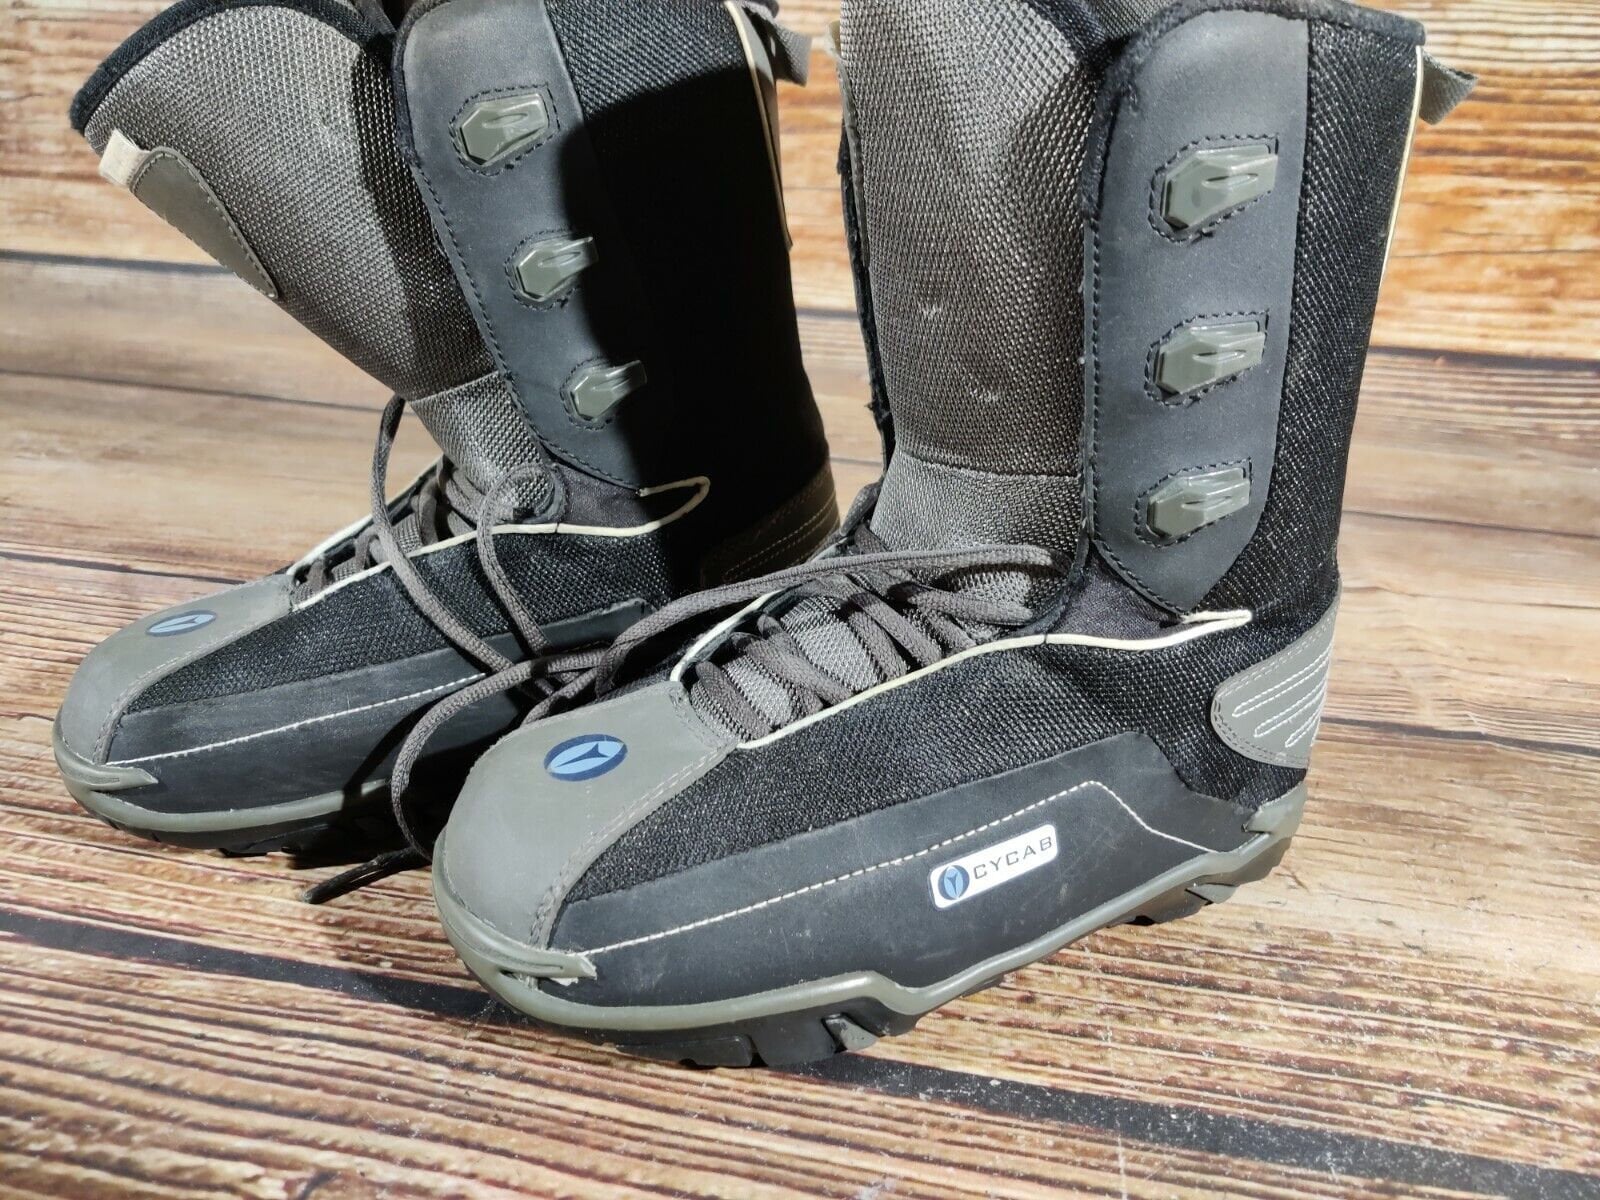 Afstoting voor klein CYCAB Snowboard Boots Size EU41 US8.5 UK7.5 Mondo 260 Mm B - Etsy